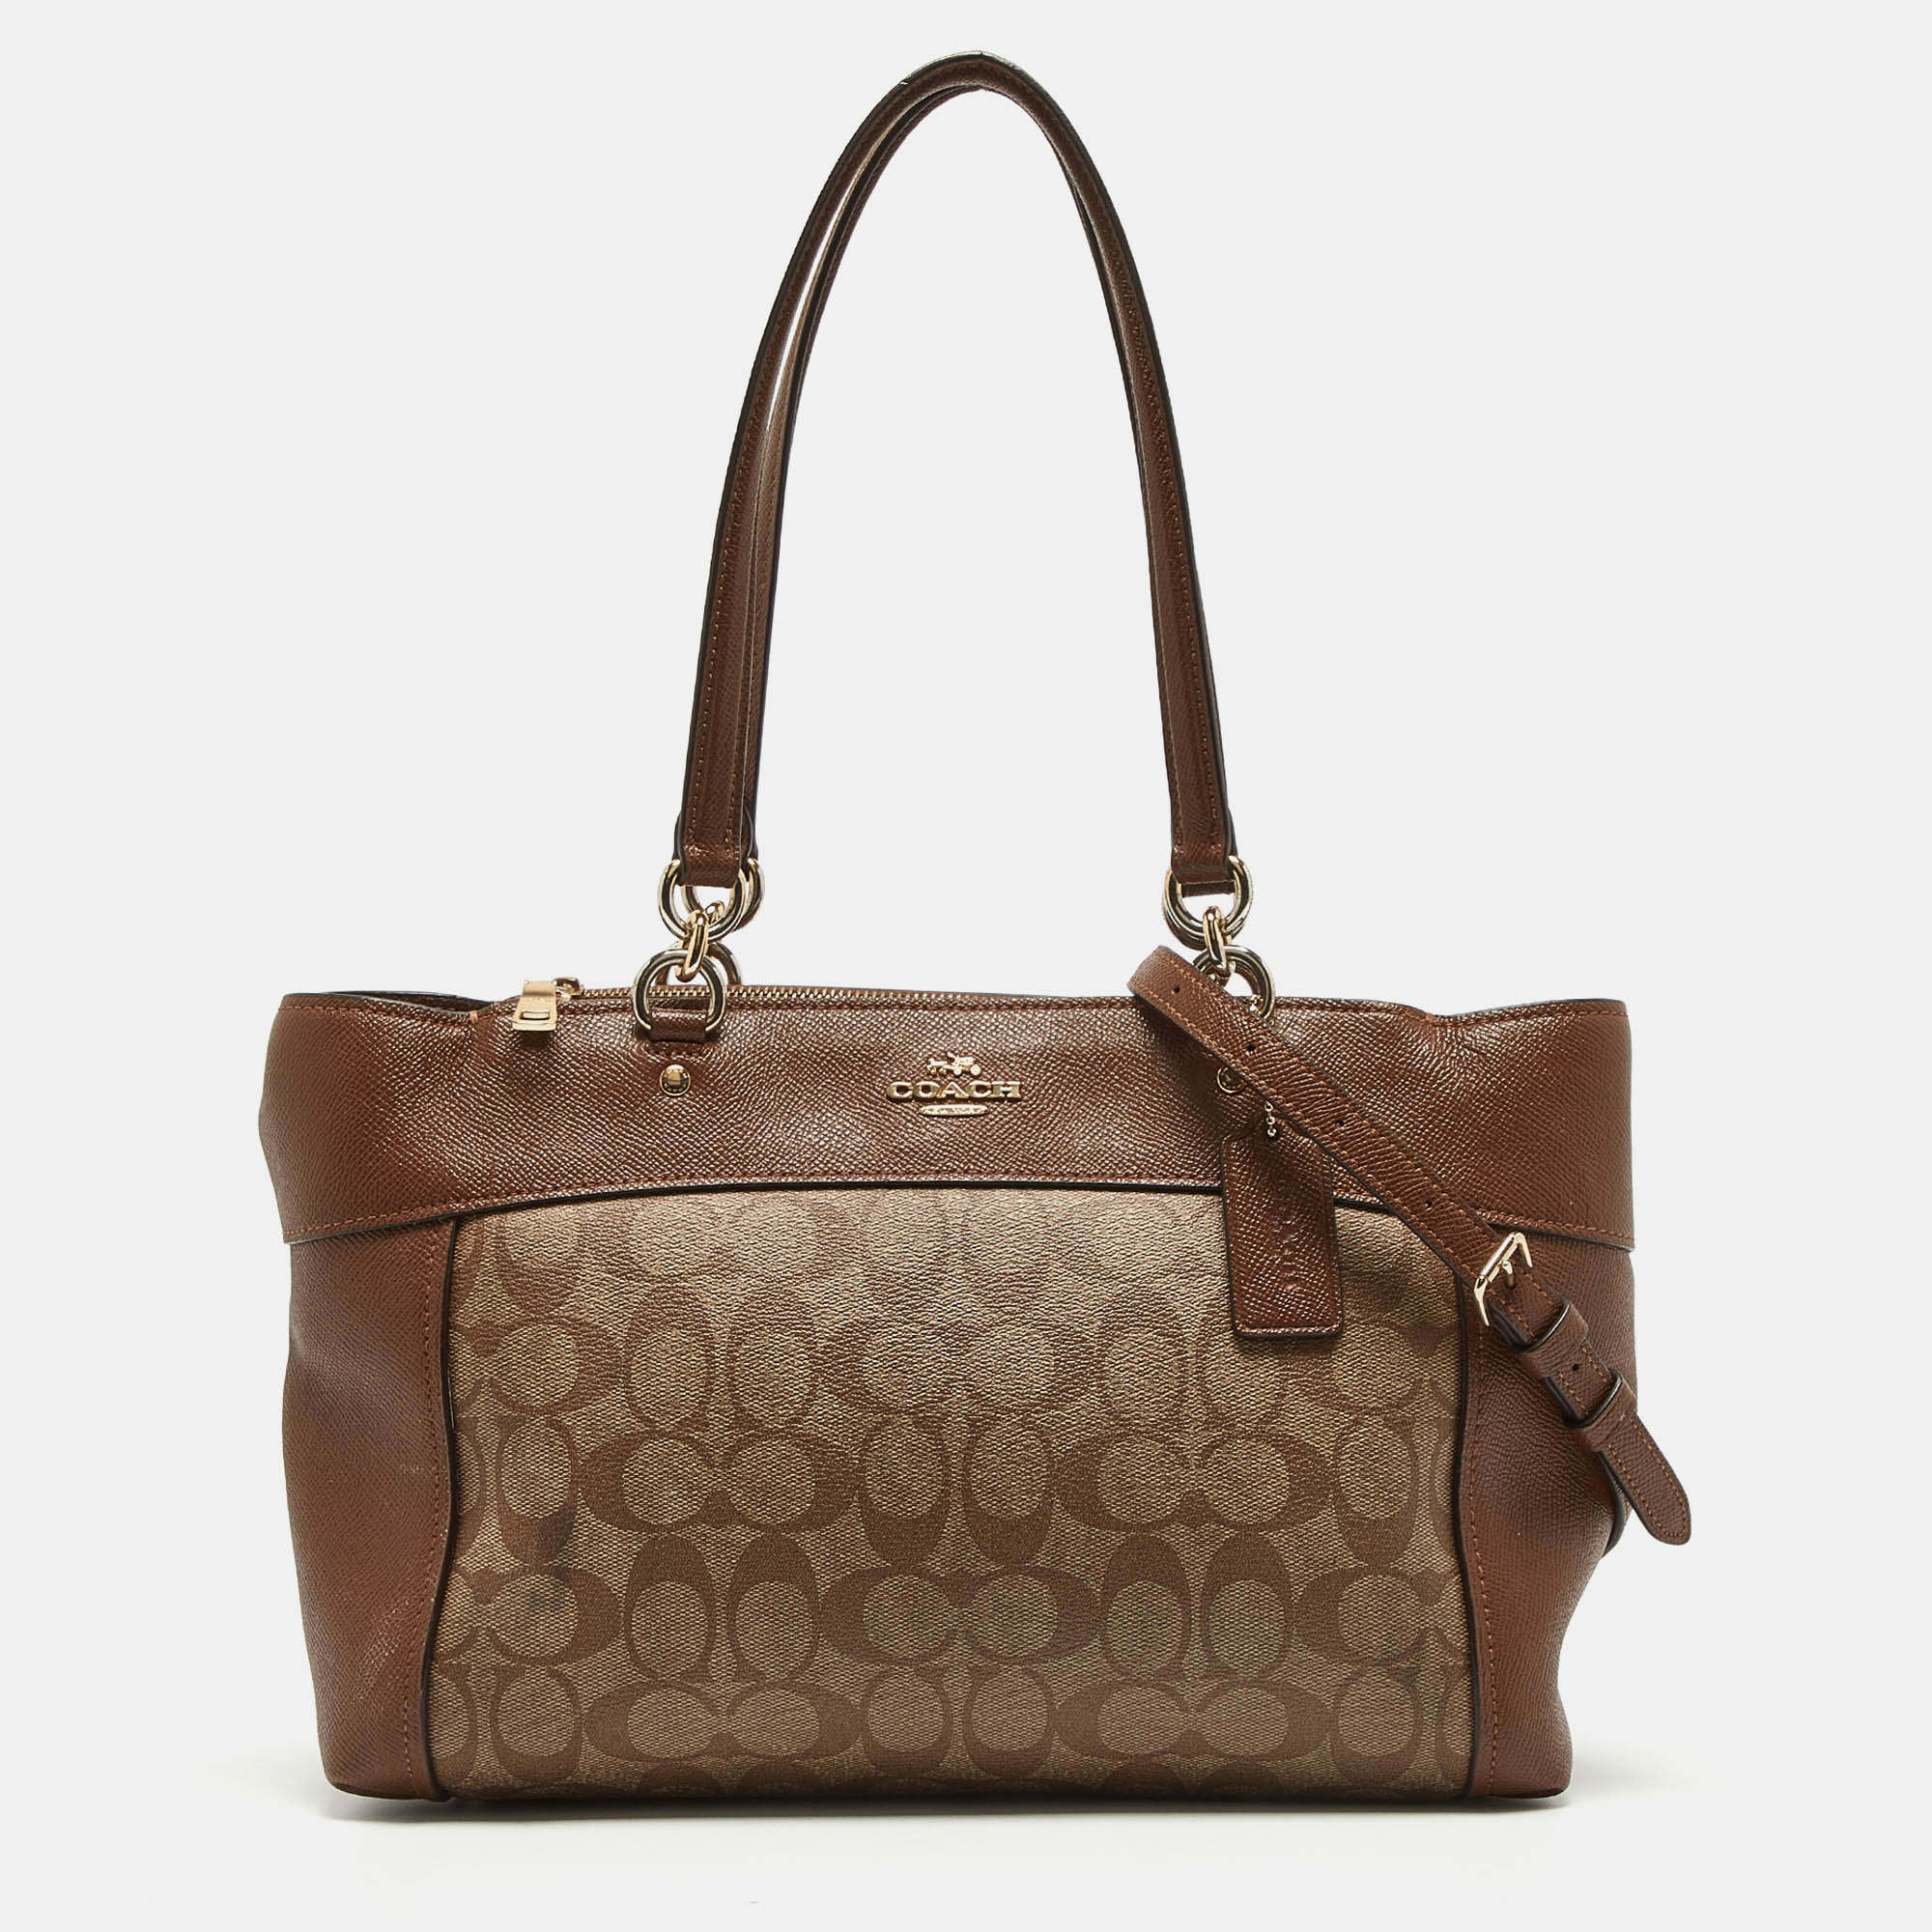 

Coach Brown/Beige Signature Coated Canvas and Leather Brooke Satchel